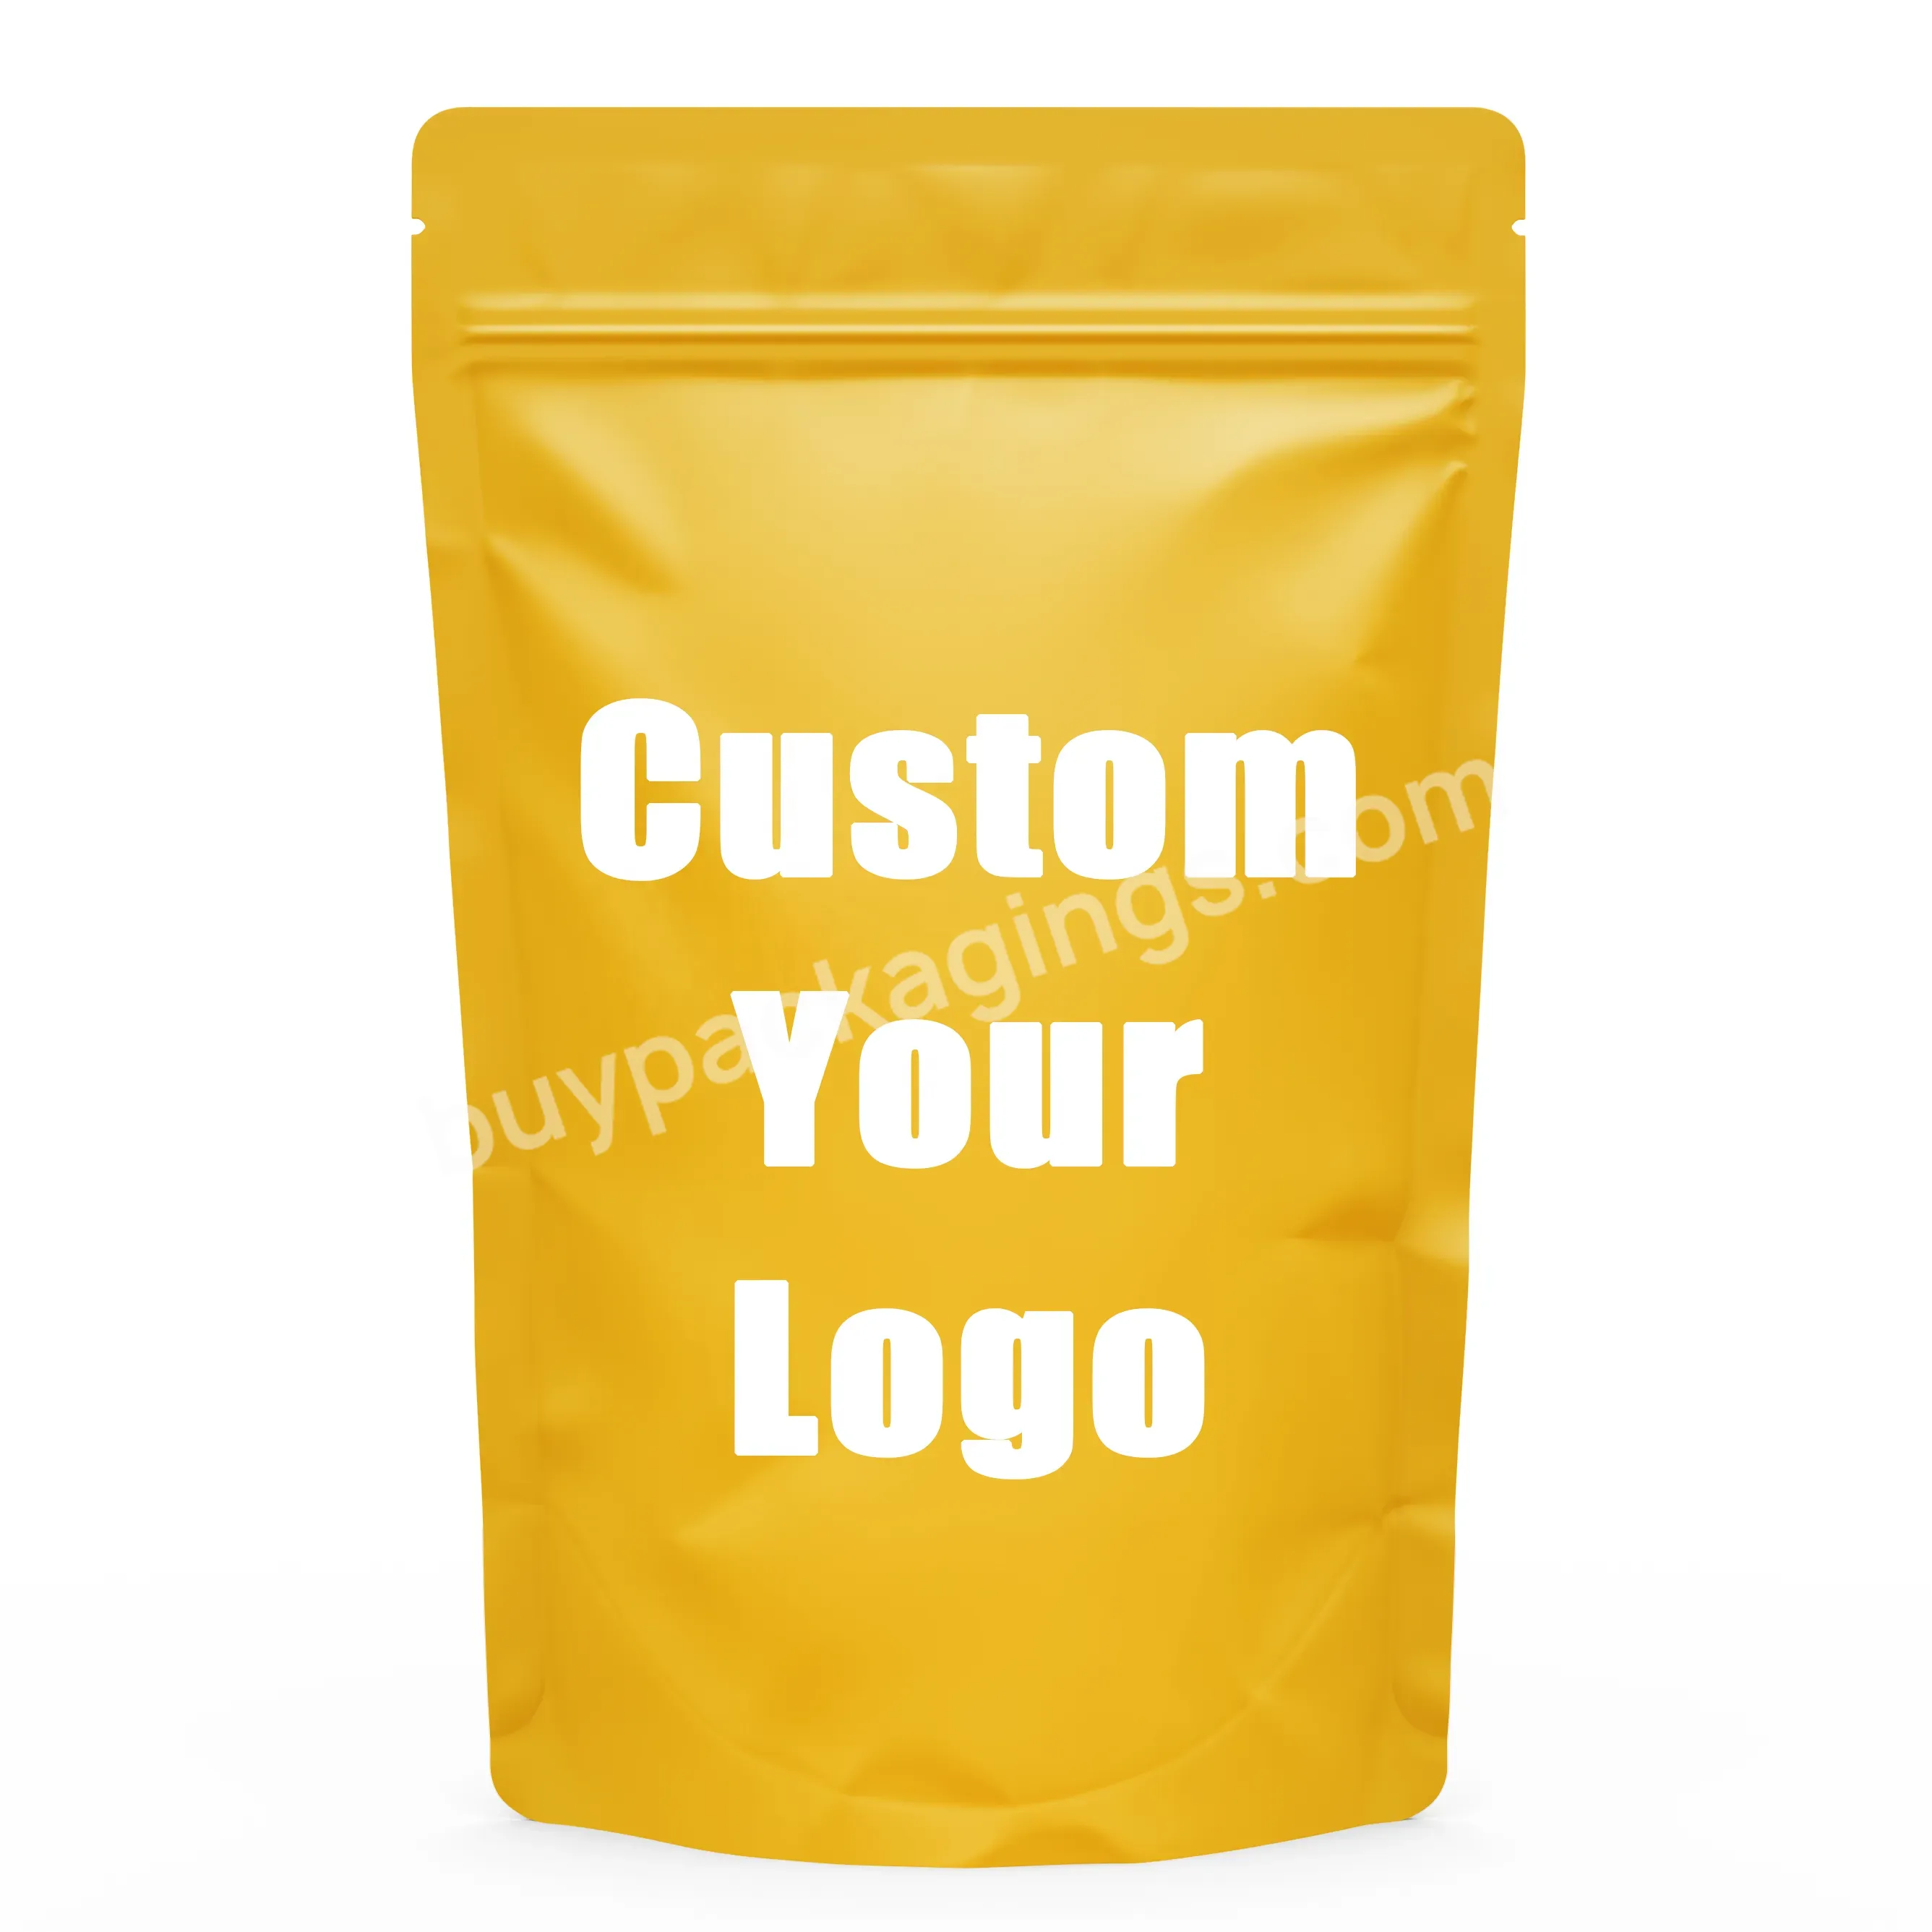 Custom Printed Food Ziplock Bag Stand Up Zip Pouch Product Package Edibles Candy Cali Packs 3.5g Smellproof Bag